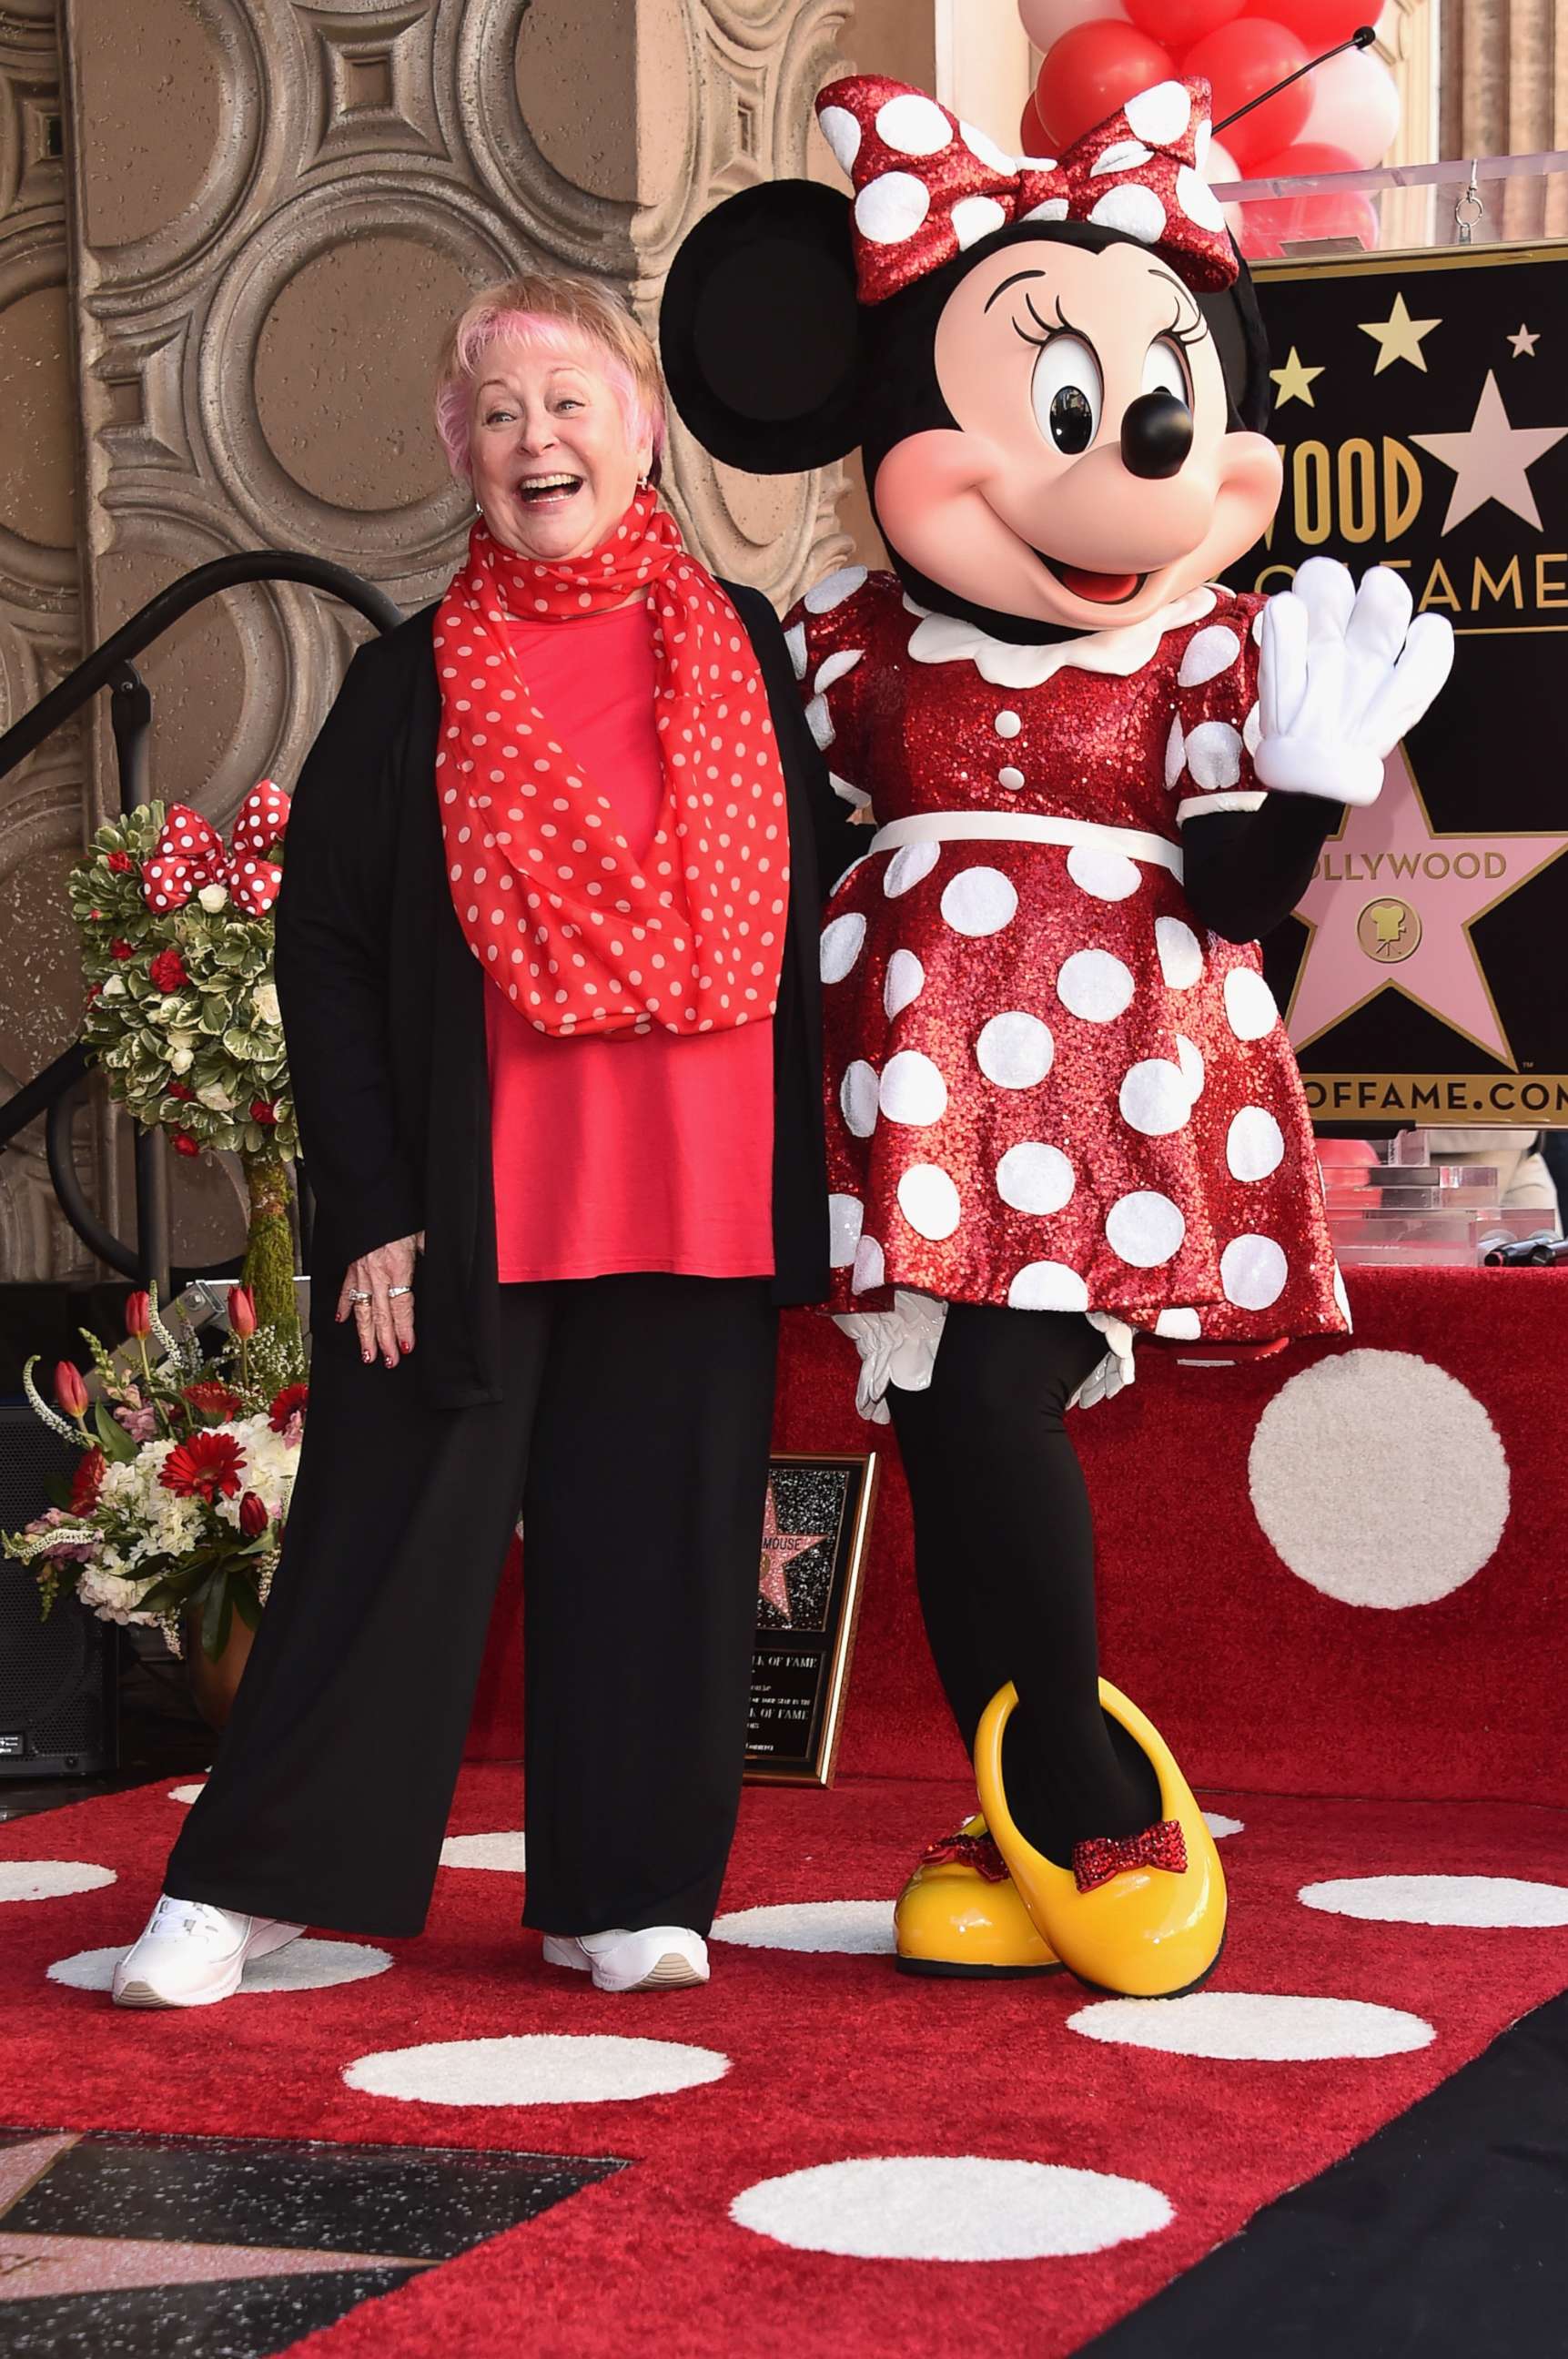 PHOTO: Russi Taylor, seen here Jan. 22, 2018, was best known for voicing the Disney character Minnie Mouse. She passed away on Saturday, July 26, 2019 in Glendale, Calif. She was 75 years old. 